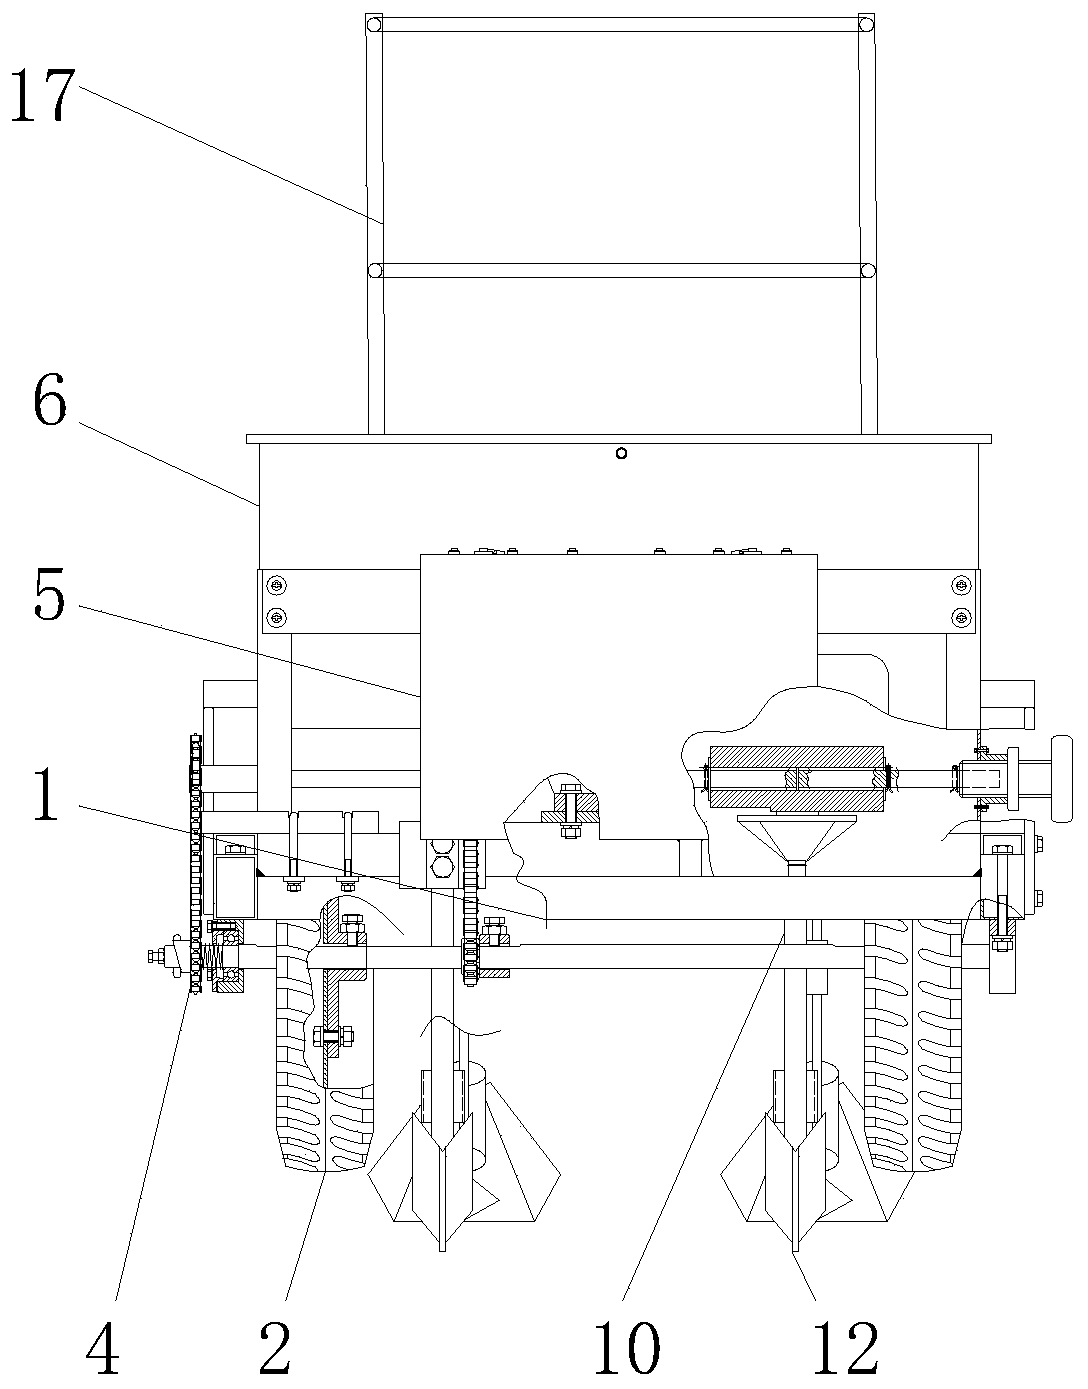 Agricultural sowing vehicle with watering function